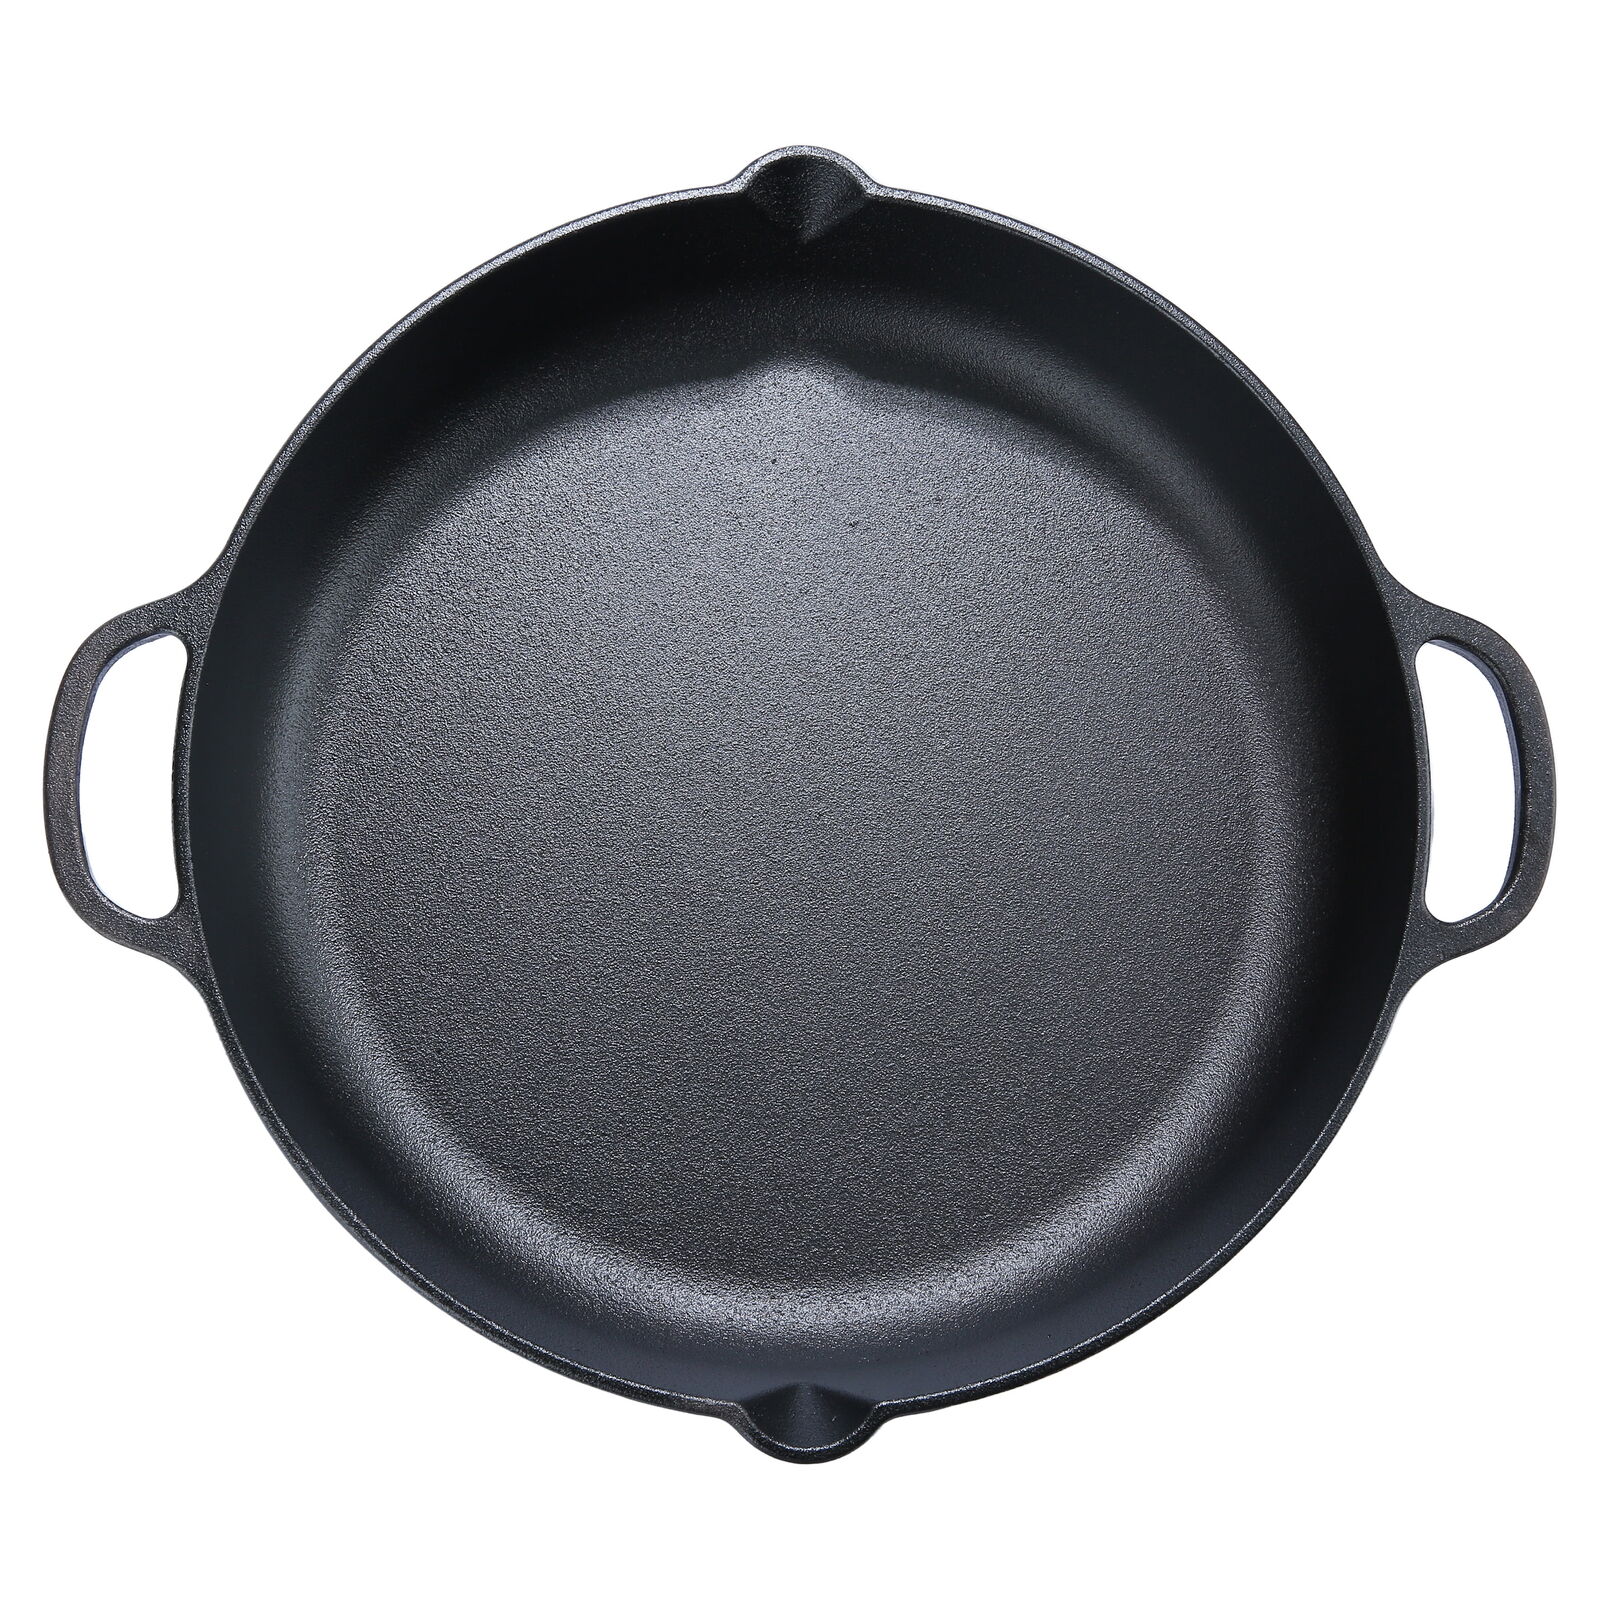 14-inch Cast Iron Skillet: Your All-in-One Kitchen Essential